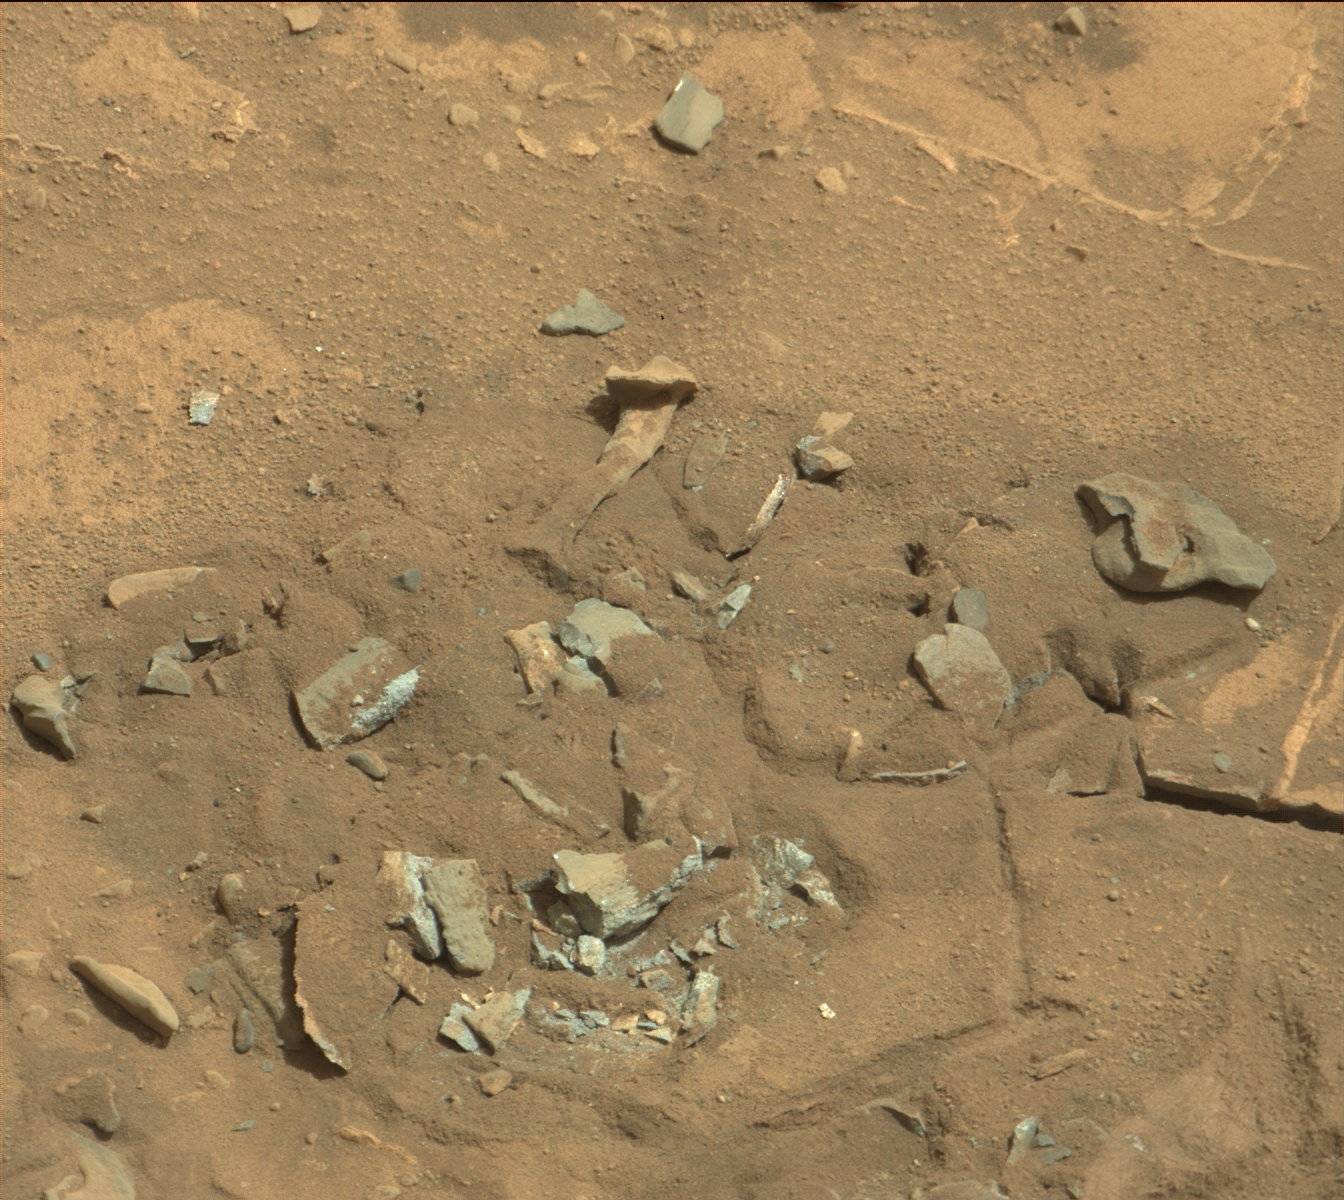 A bunch of stones scoured out by the wind on Mars.